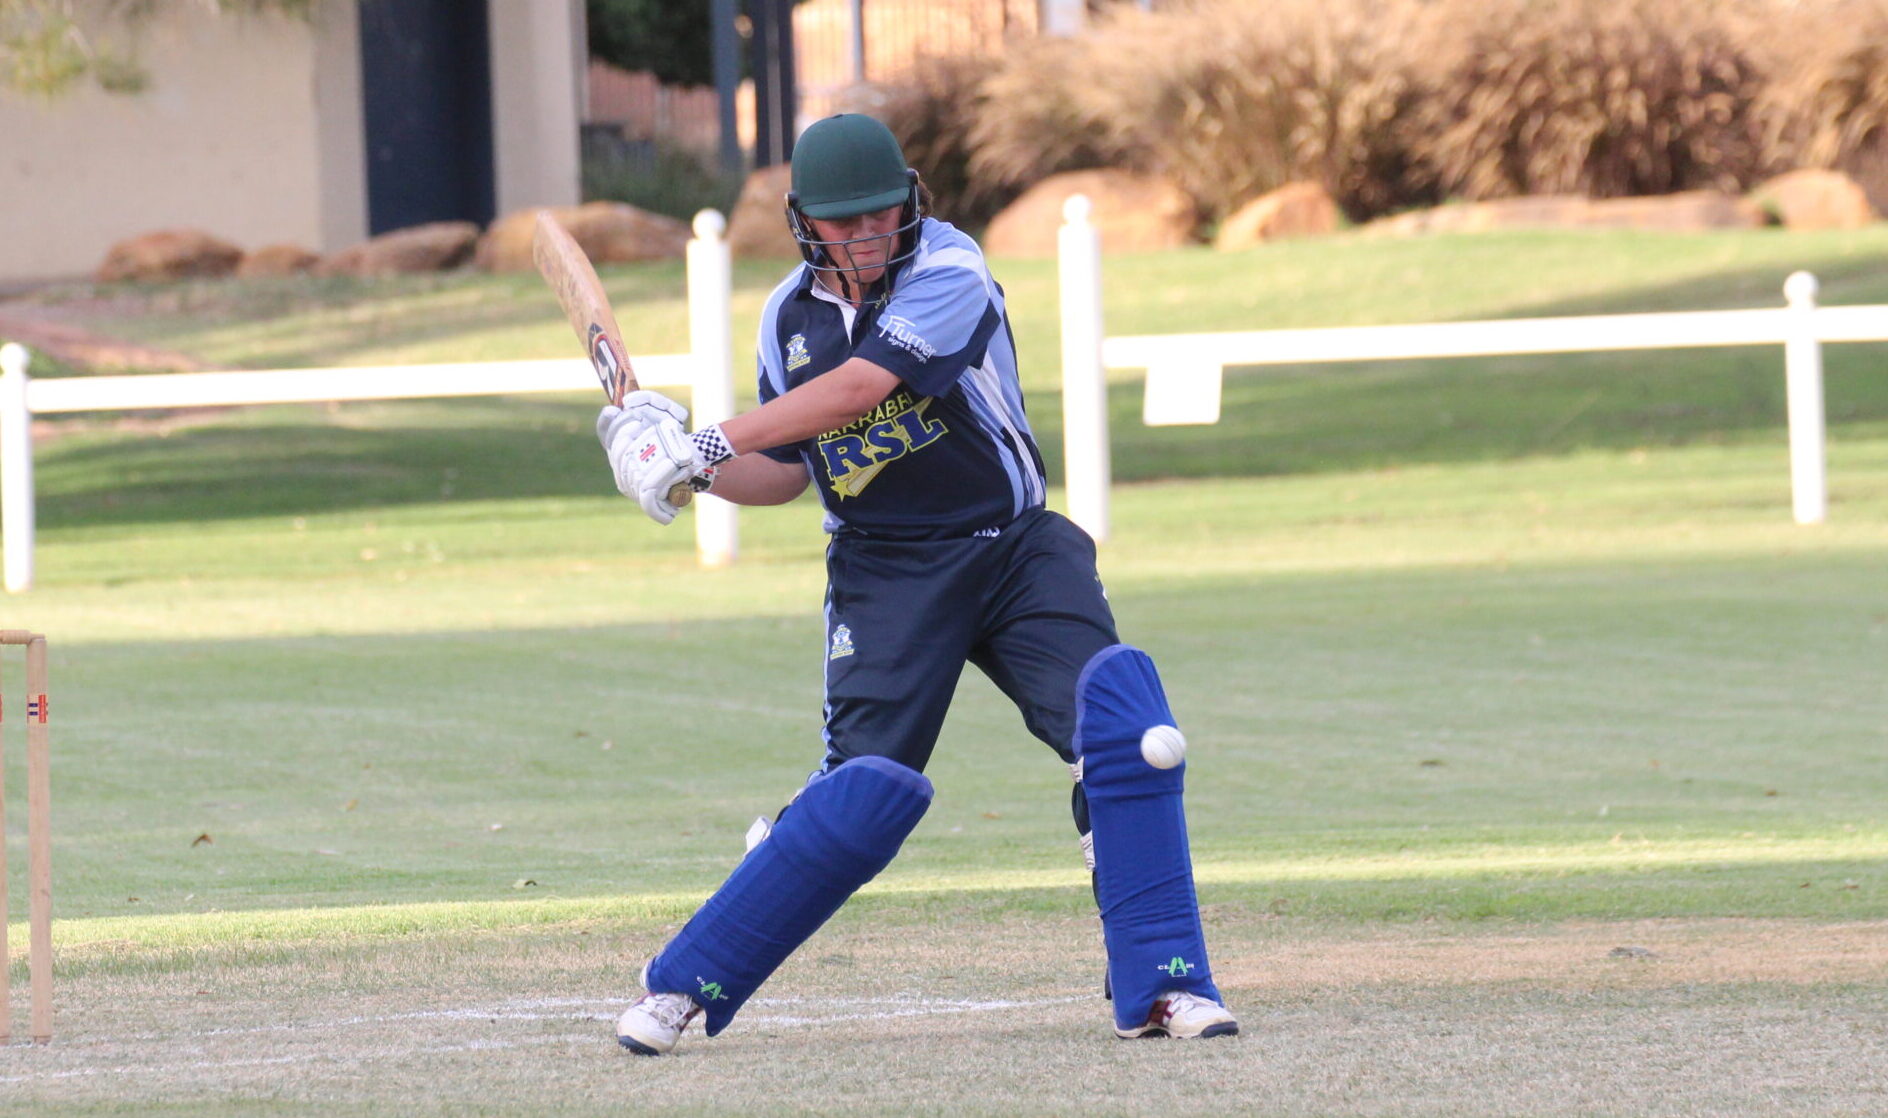 RSL bounces back with a 38-run T20 win against Tatts